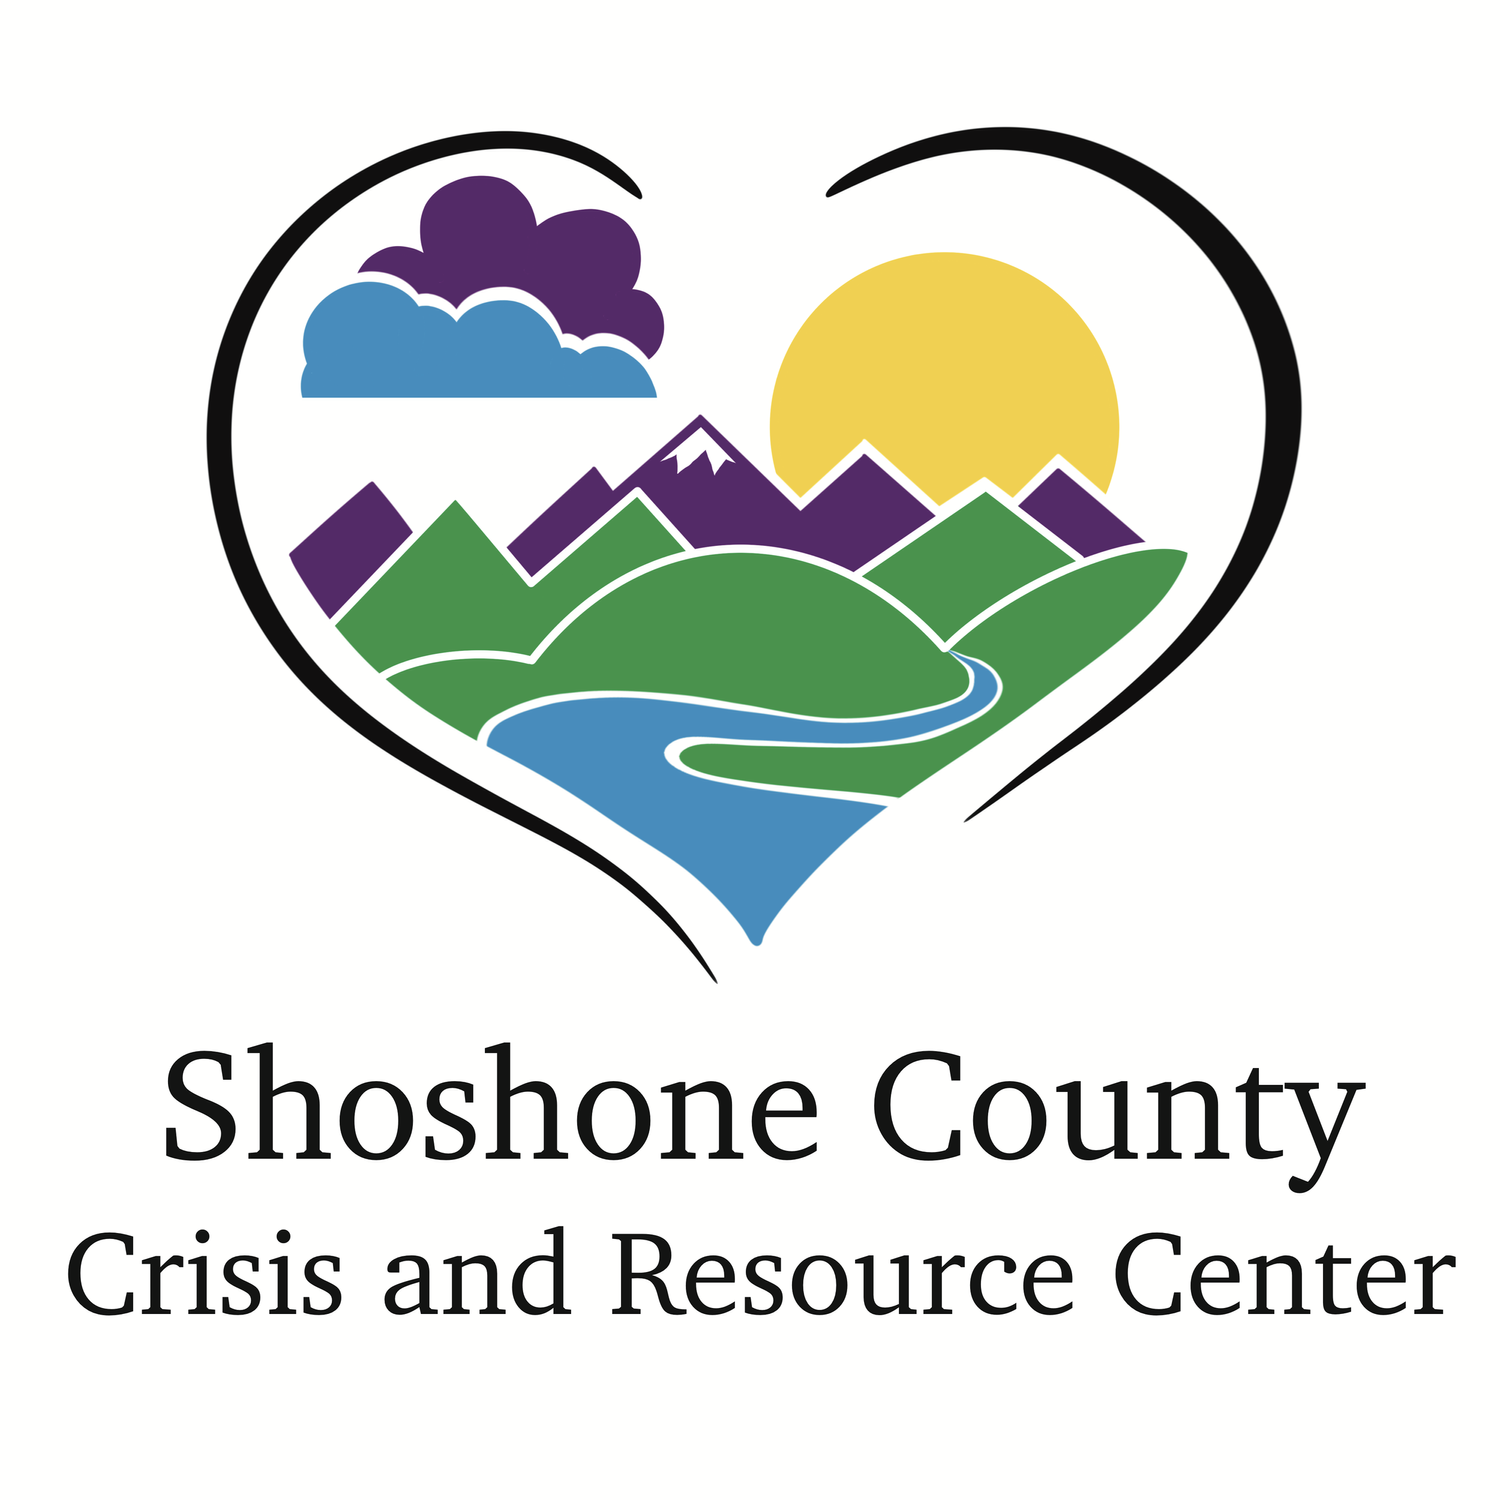 Shoshone County Crisis and Resource Center